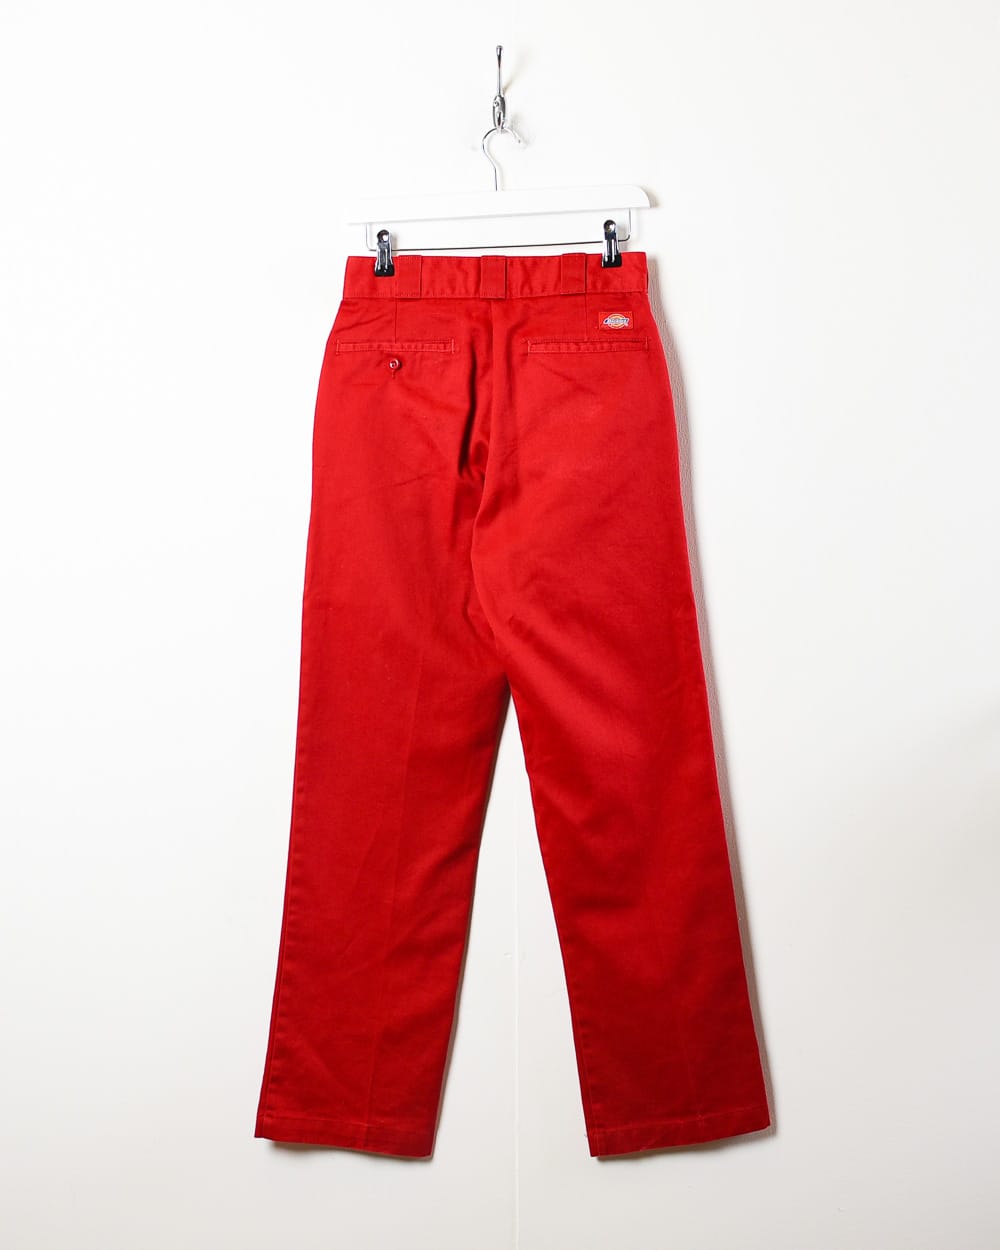 Red Dickies Trousers - W28 L31